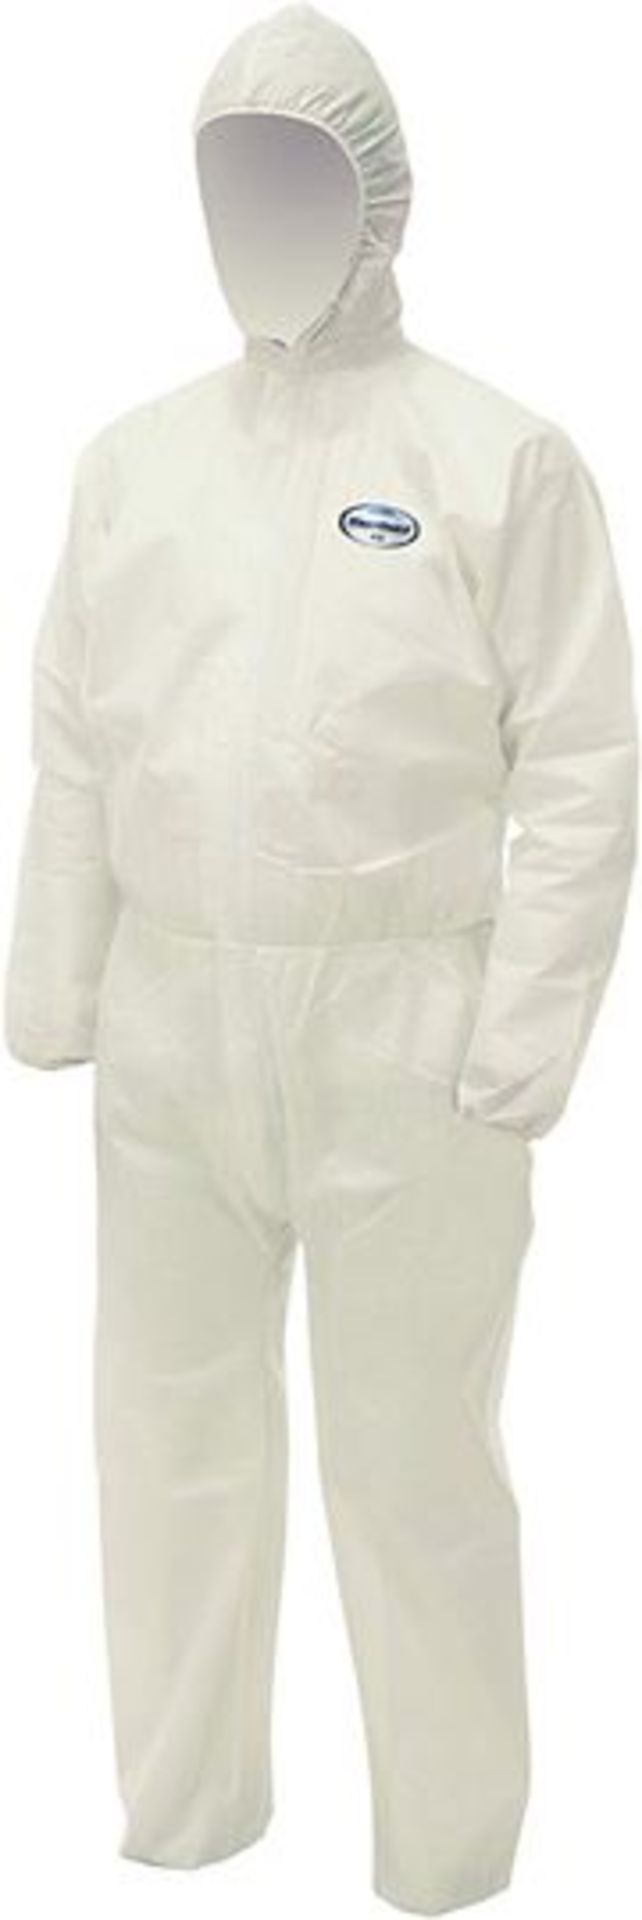 25 X Kimberly Clark Protective Suit A50 With Hood Breathable Xl